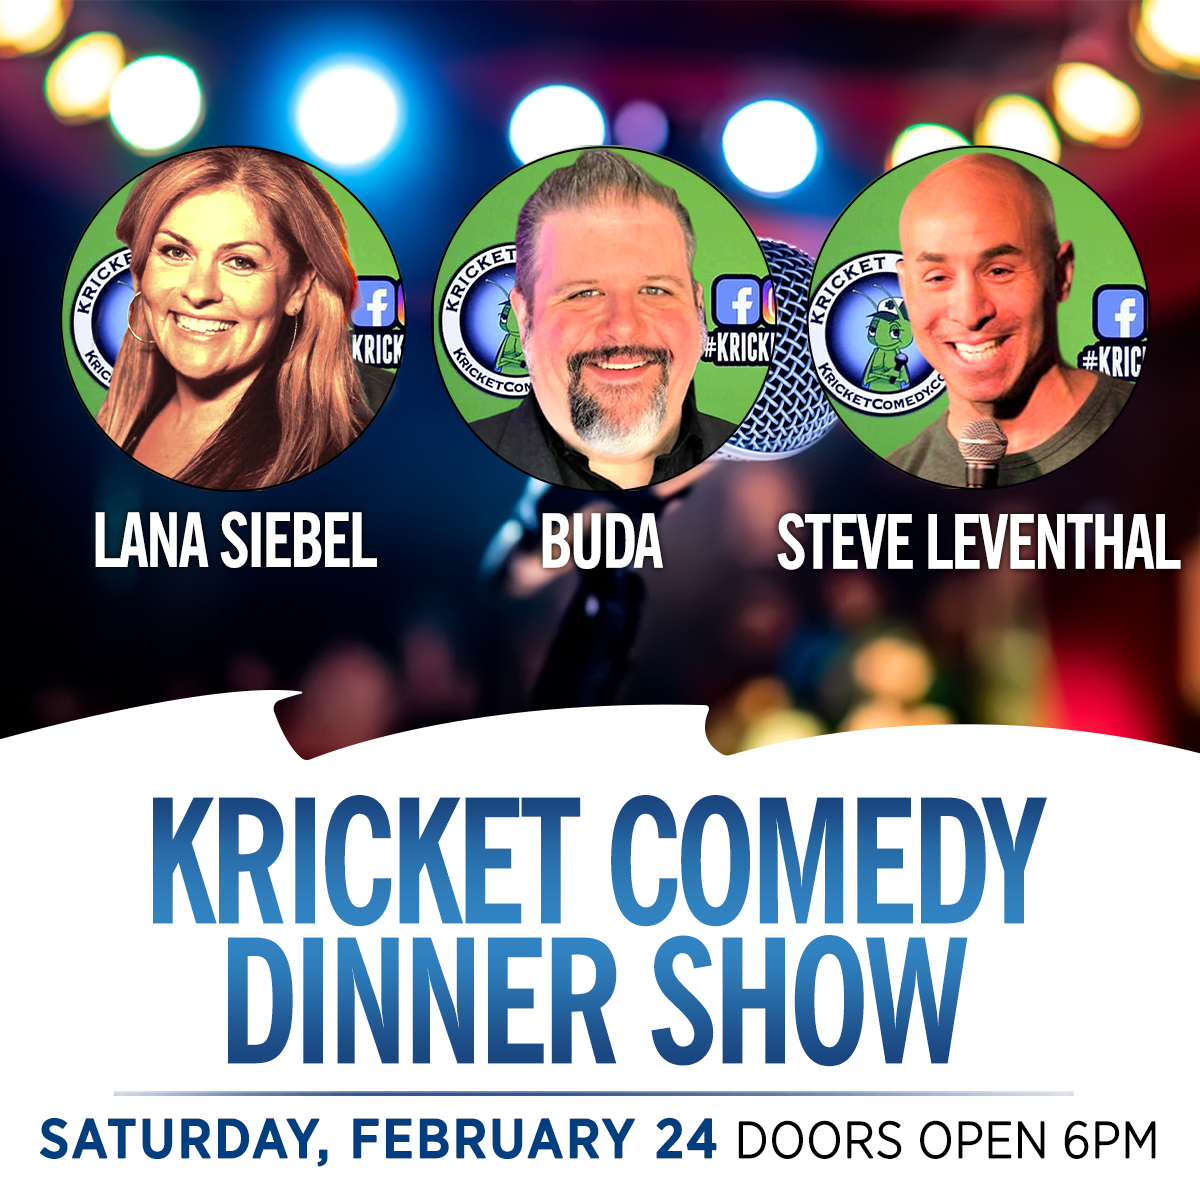 Kricket Comedy is back at Scotland Run Saturday, February 24 with a hilarious lineup! Plus enjoy a delicious buffet dinner featuring Chef's Chicken Piccata, Manicotti, Salmon Florentine and more! $65 Presale Tickets on sale NOW! Get your tickets now: brnw.ch/21wGz3y